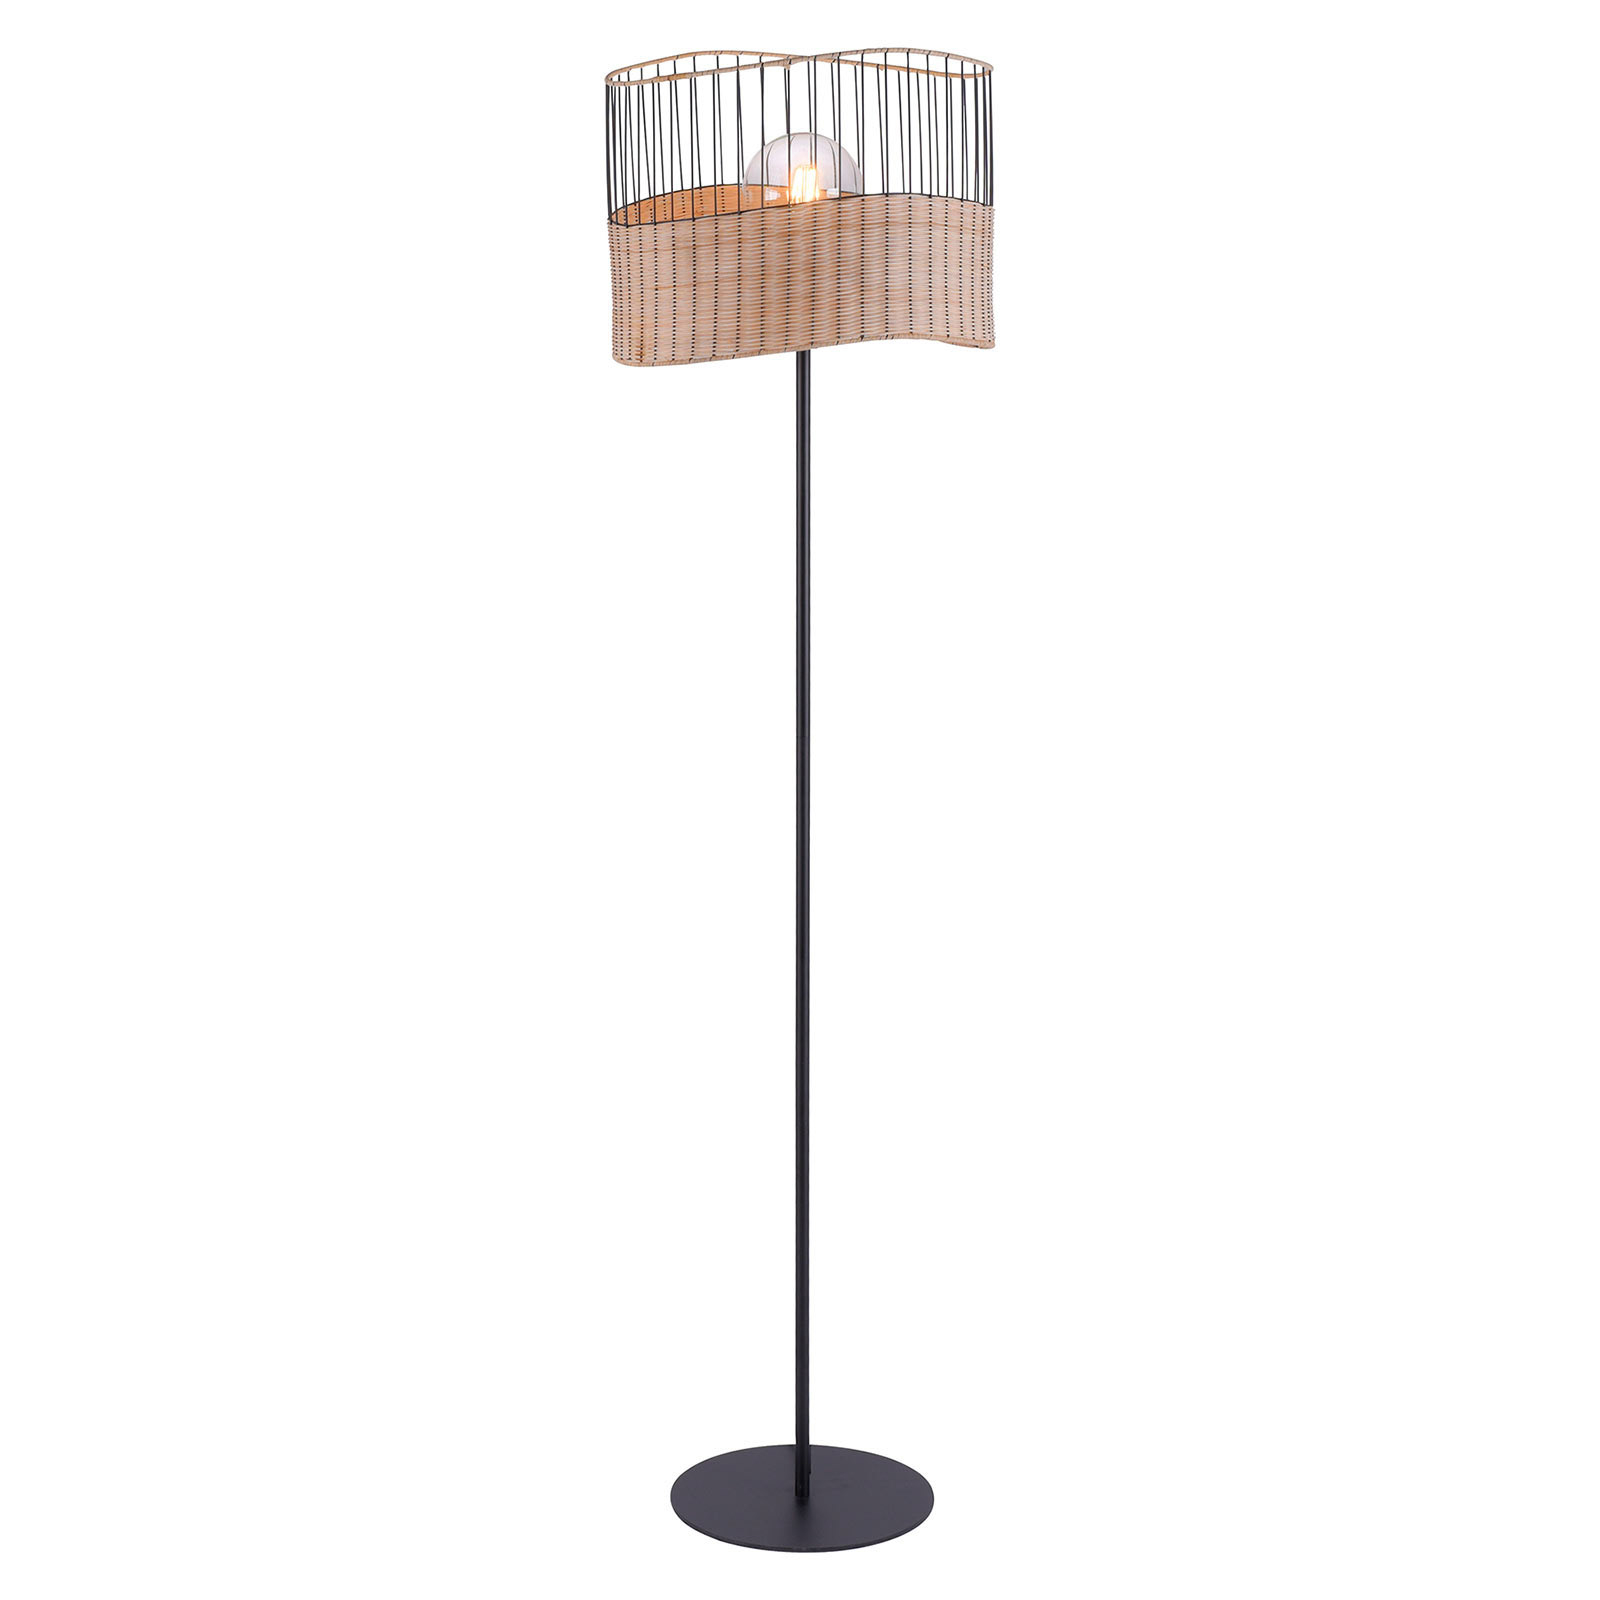 Reed floor lamp made of wood and metal